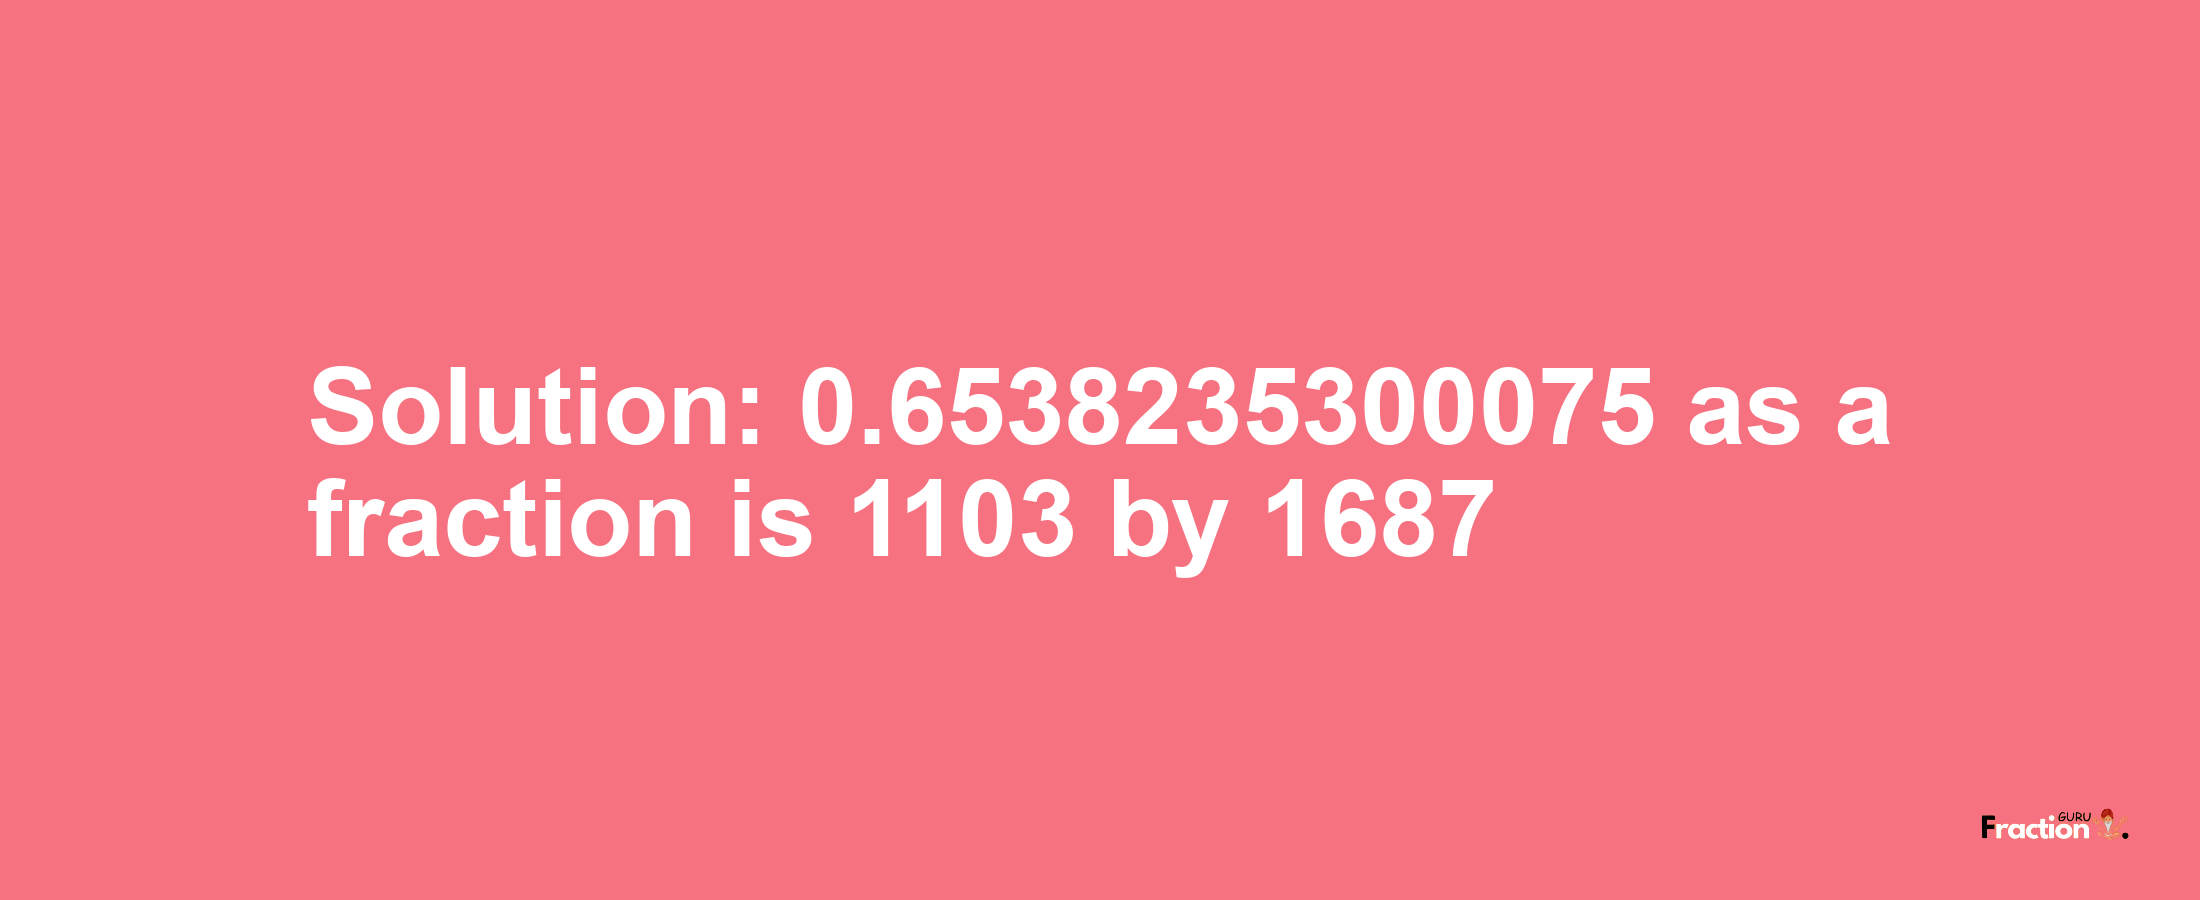 Solution:0.6538235300075 as a fraction is 1103/1687